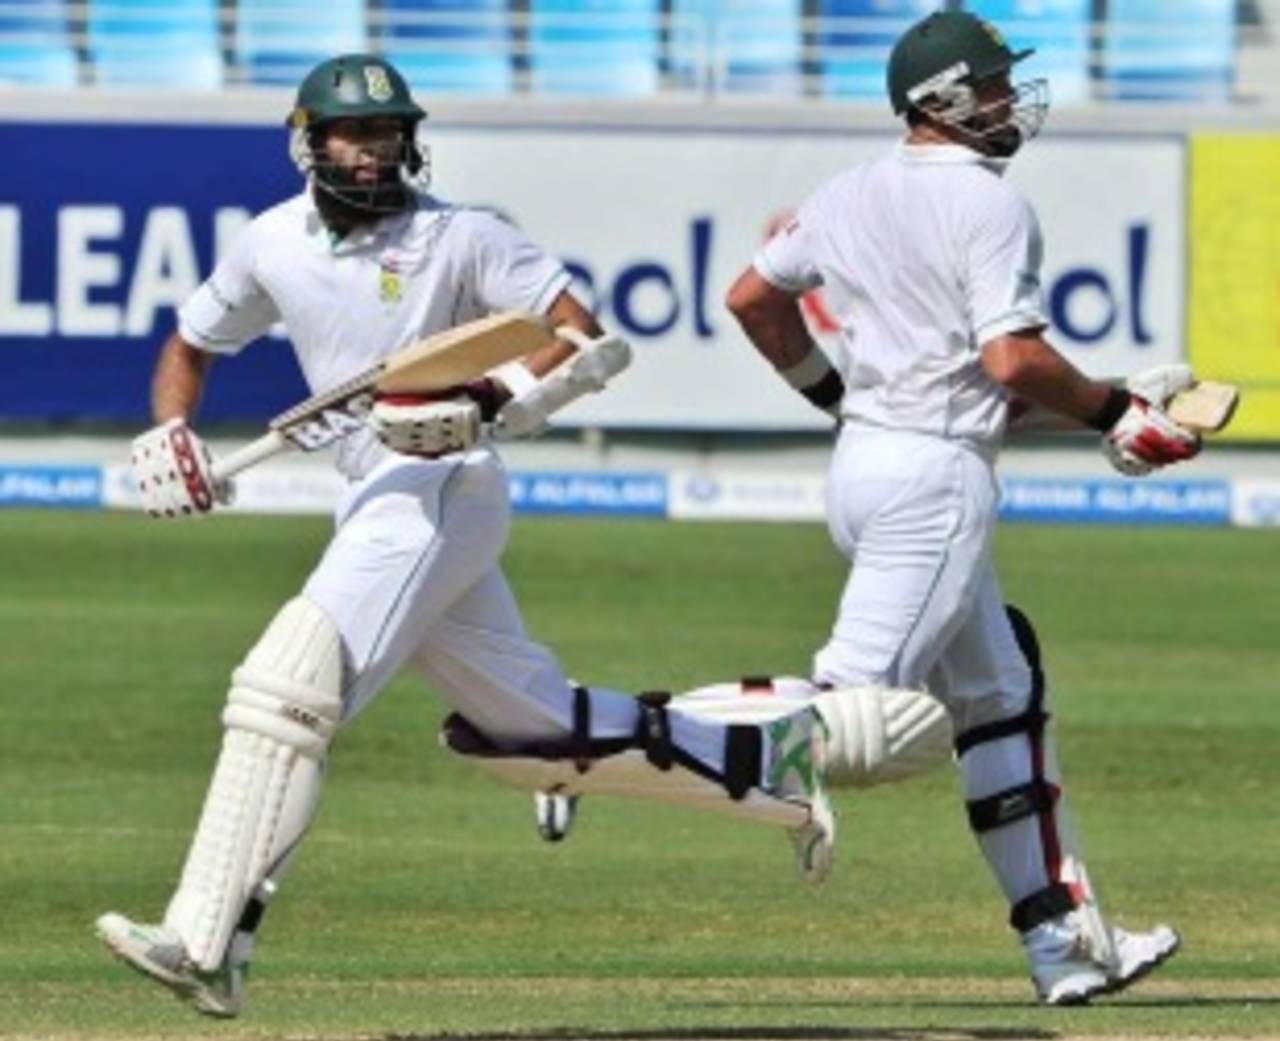 Jacques Kallis and Hashim Amla put together their fourth double hundred partnership on the fourth day at Dubai&nbsp;&nbsp;&bull;&nbsp;&nbsp;AFP